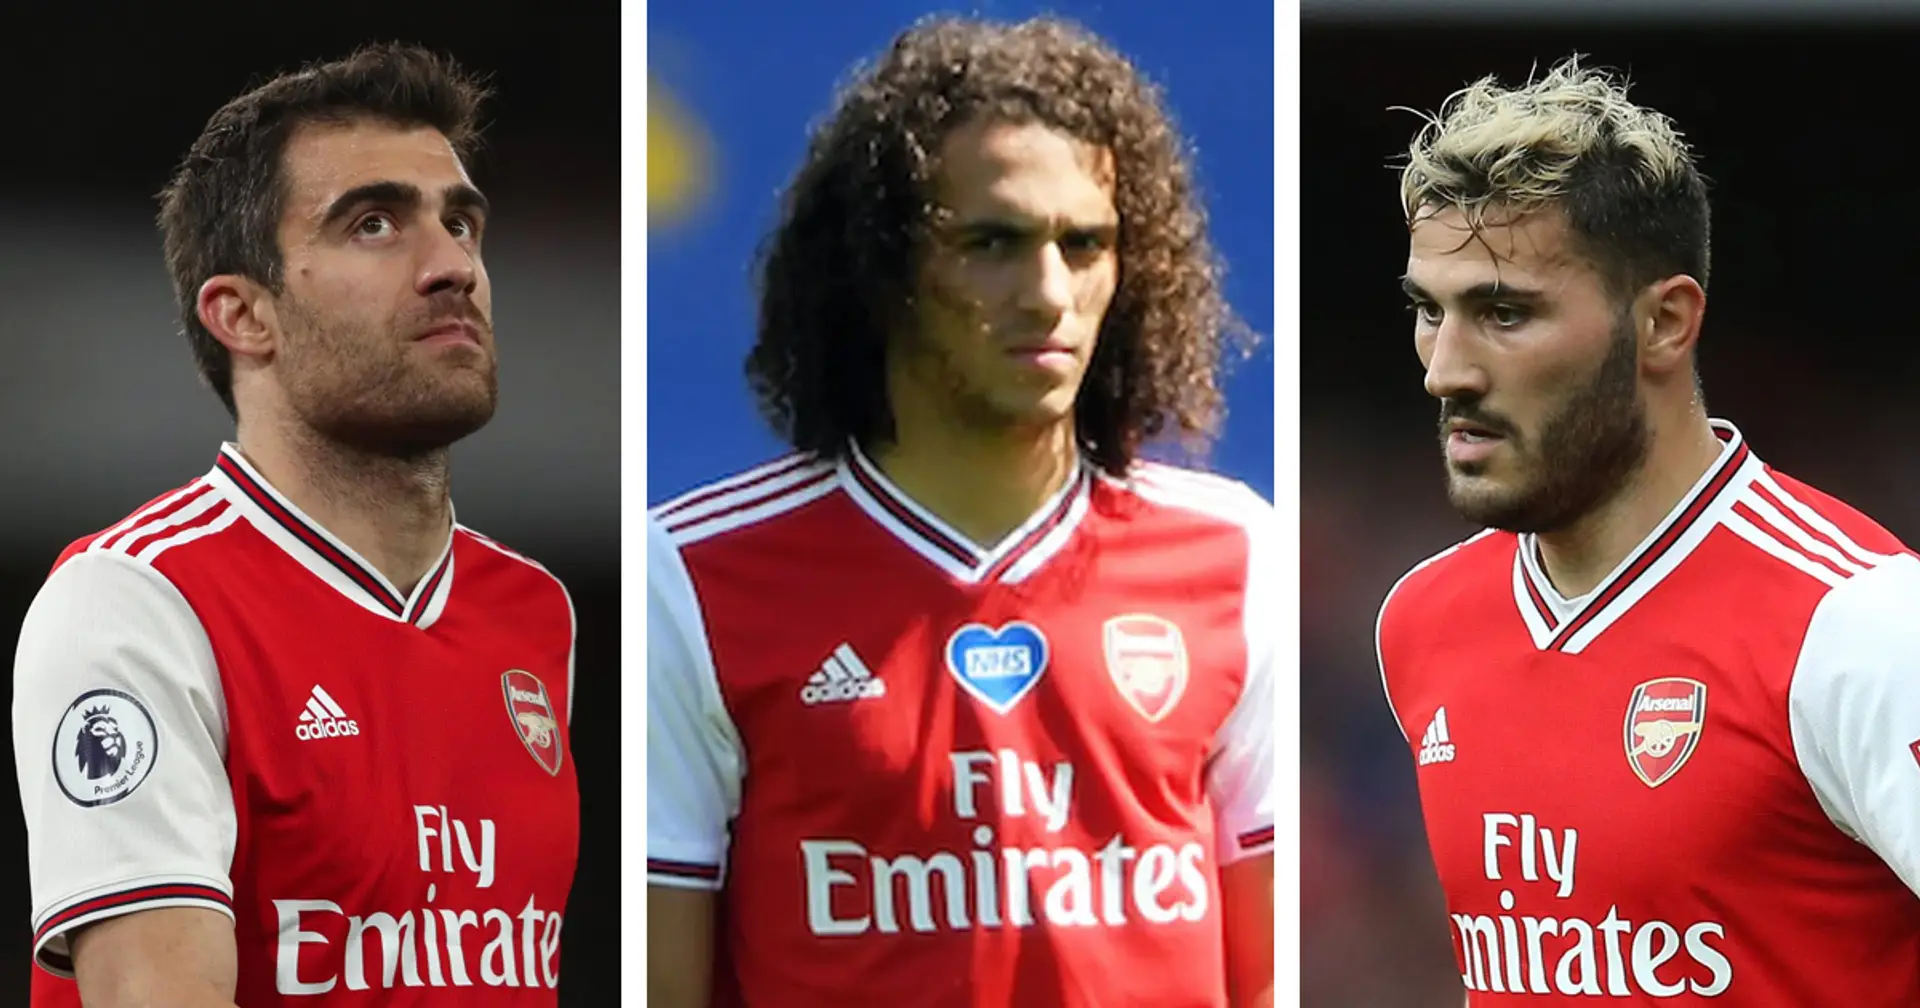 4 Arsenal players with less than 20% chance of staying